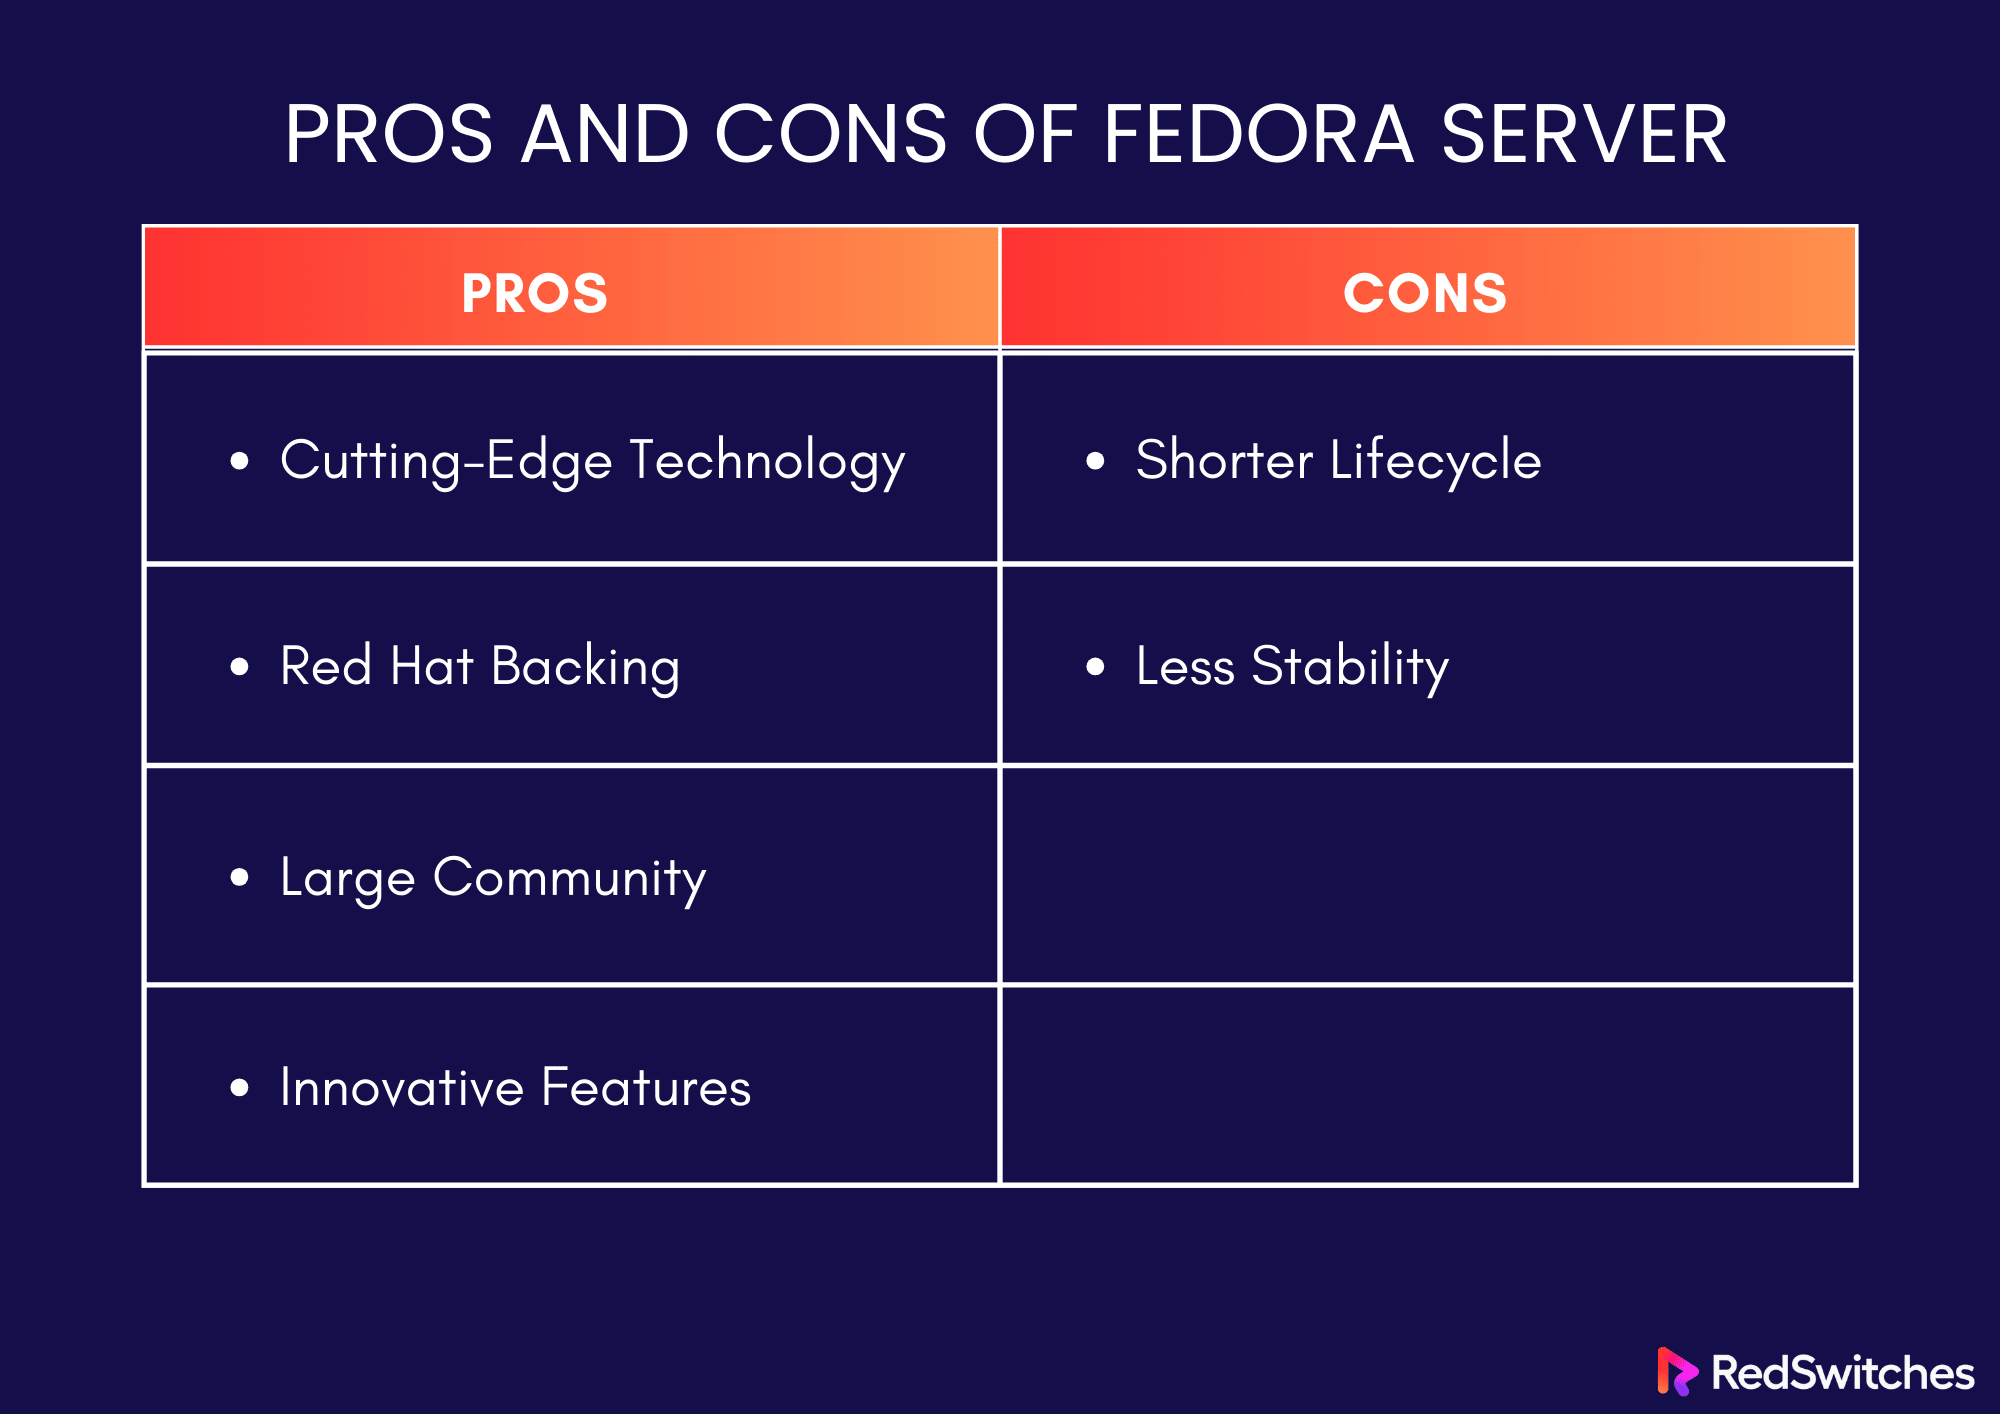 Pros and Cons of Fedora Server